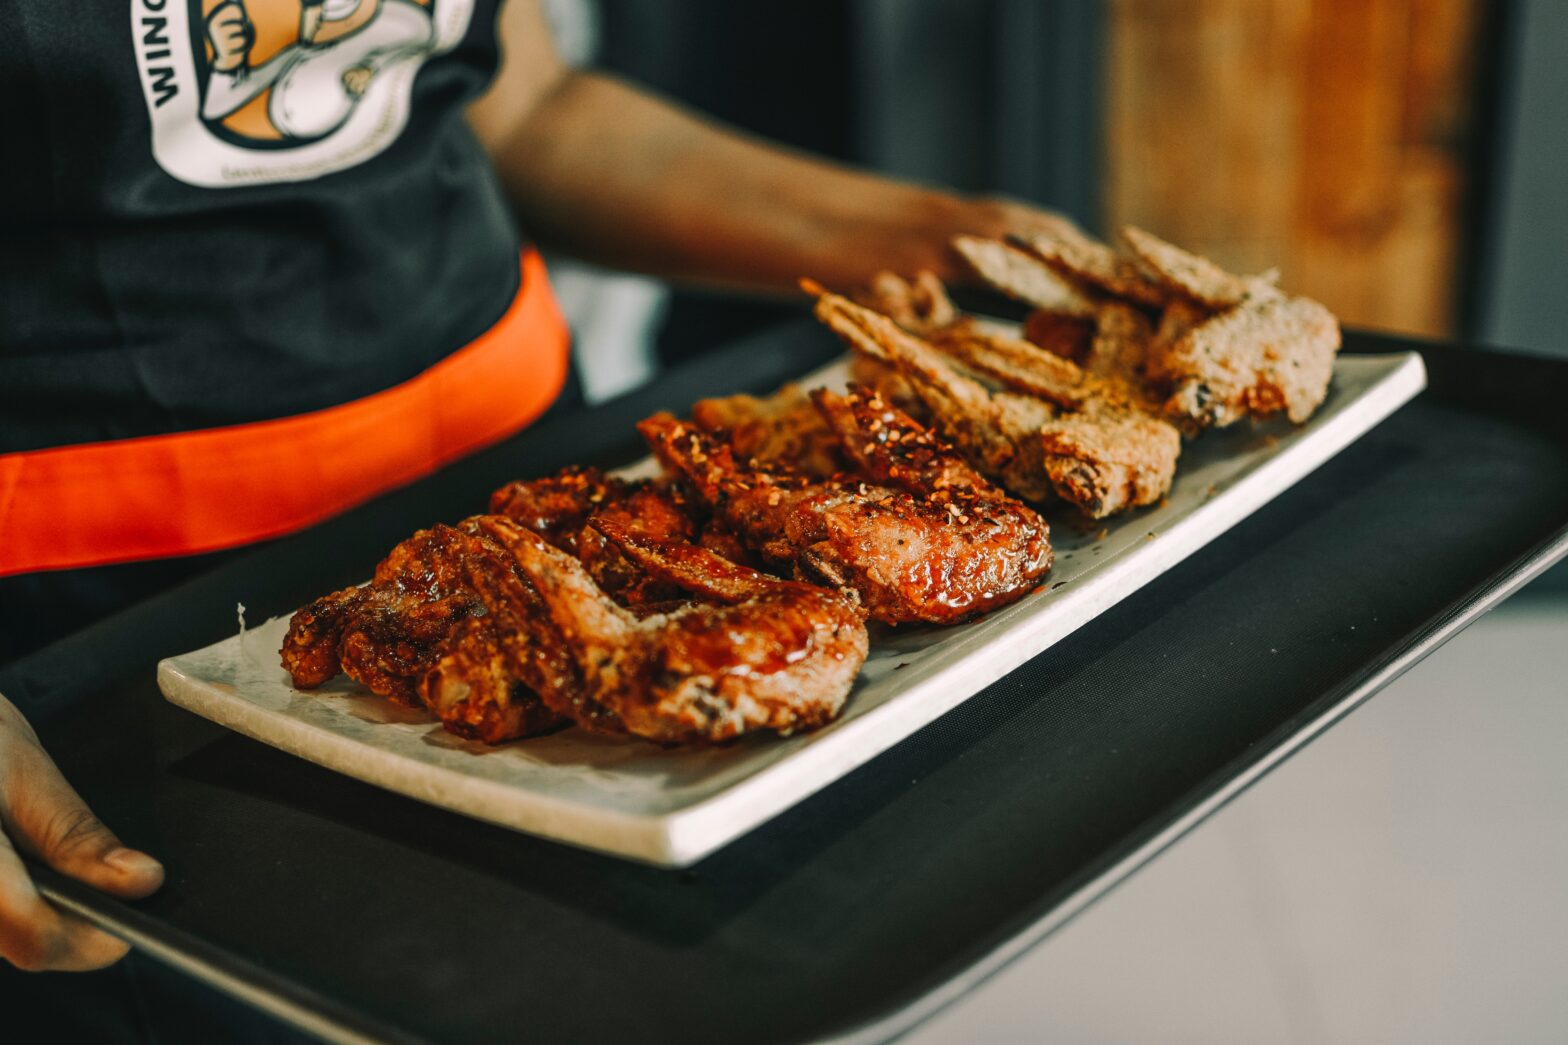 The Most Popular Black-Owned Restaurants for Chicken